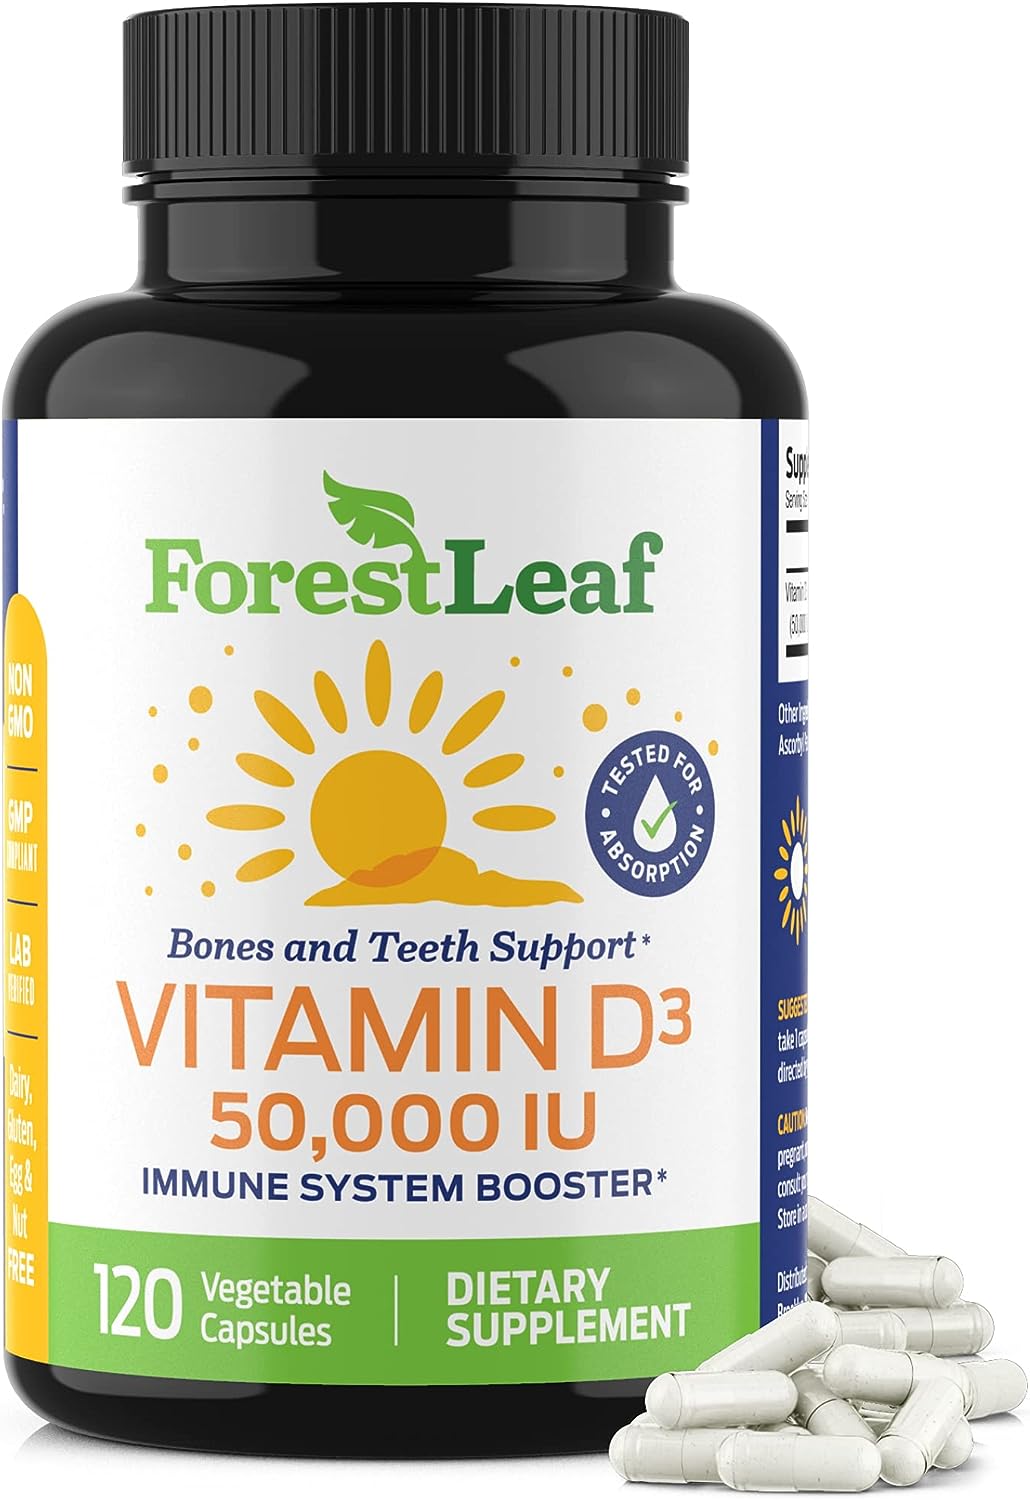 ForestLeaf Vitamin D3 50,000 IU Weekly Supplement Review